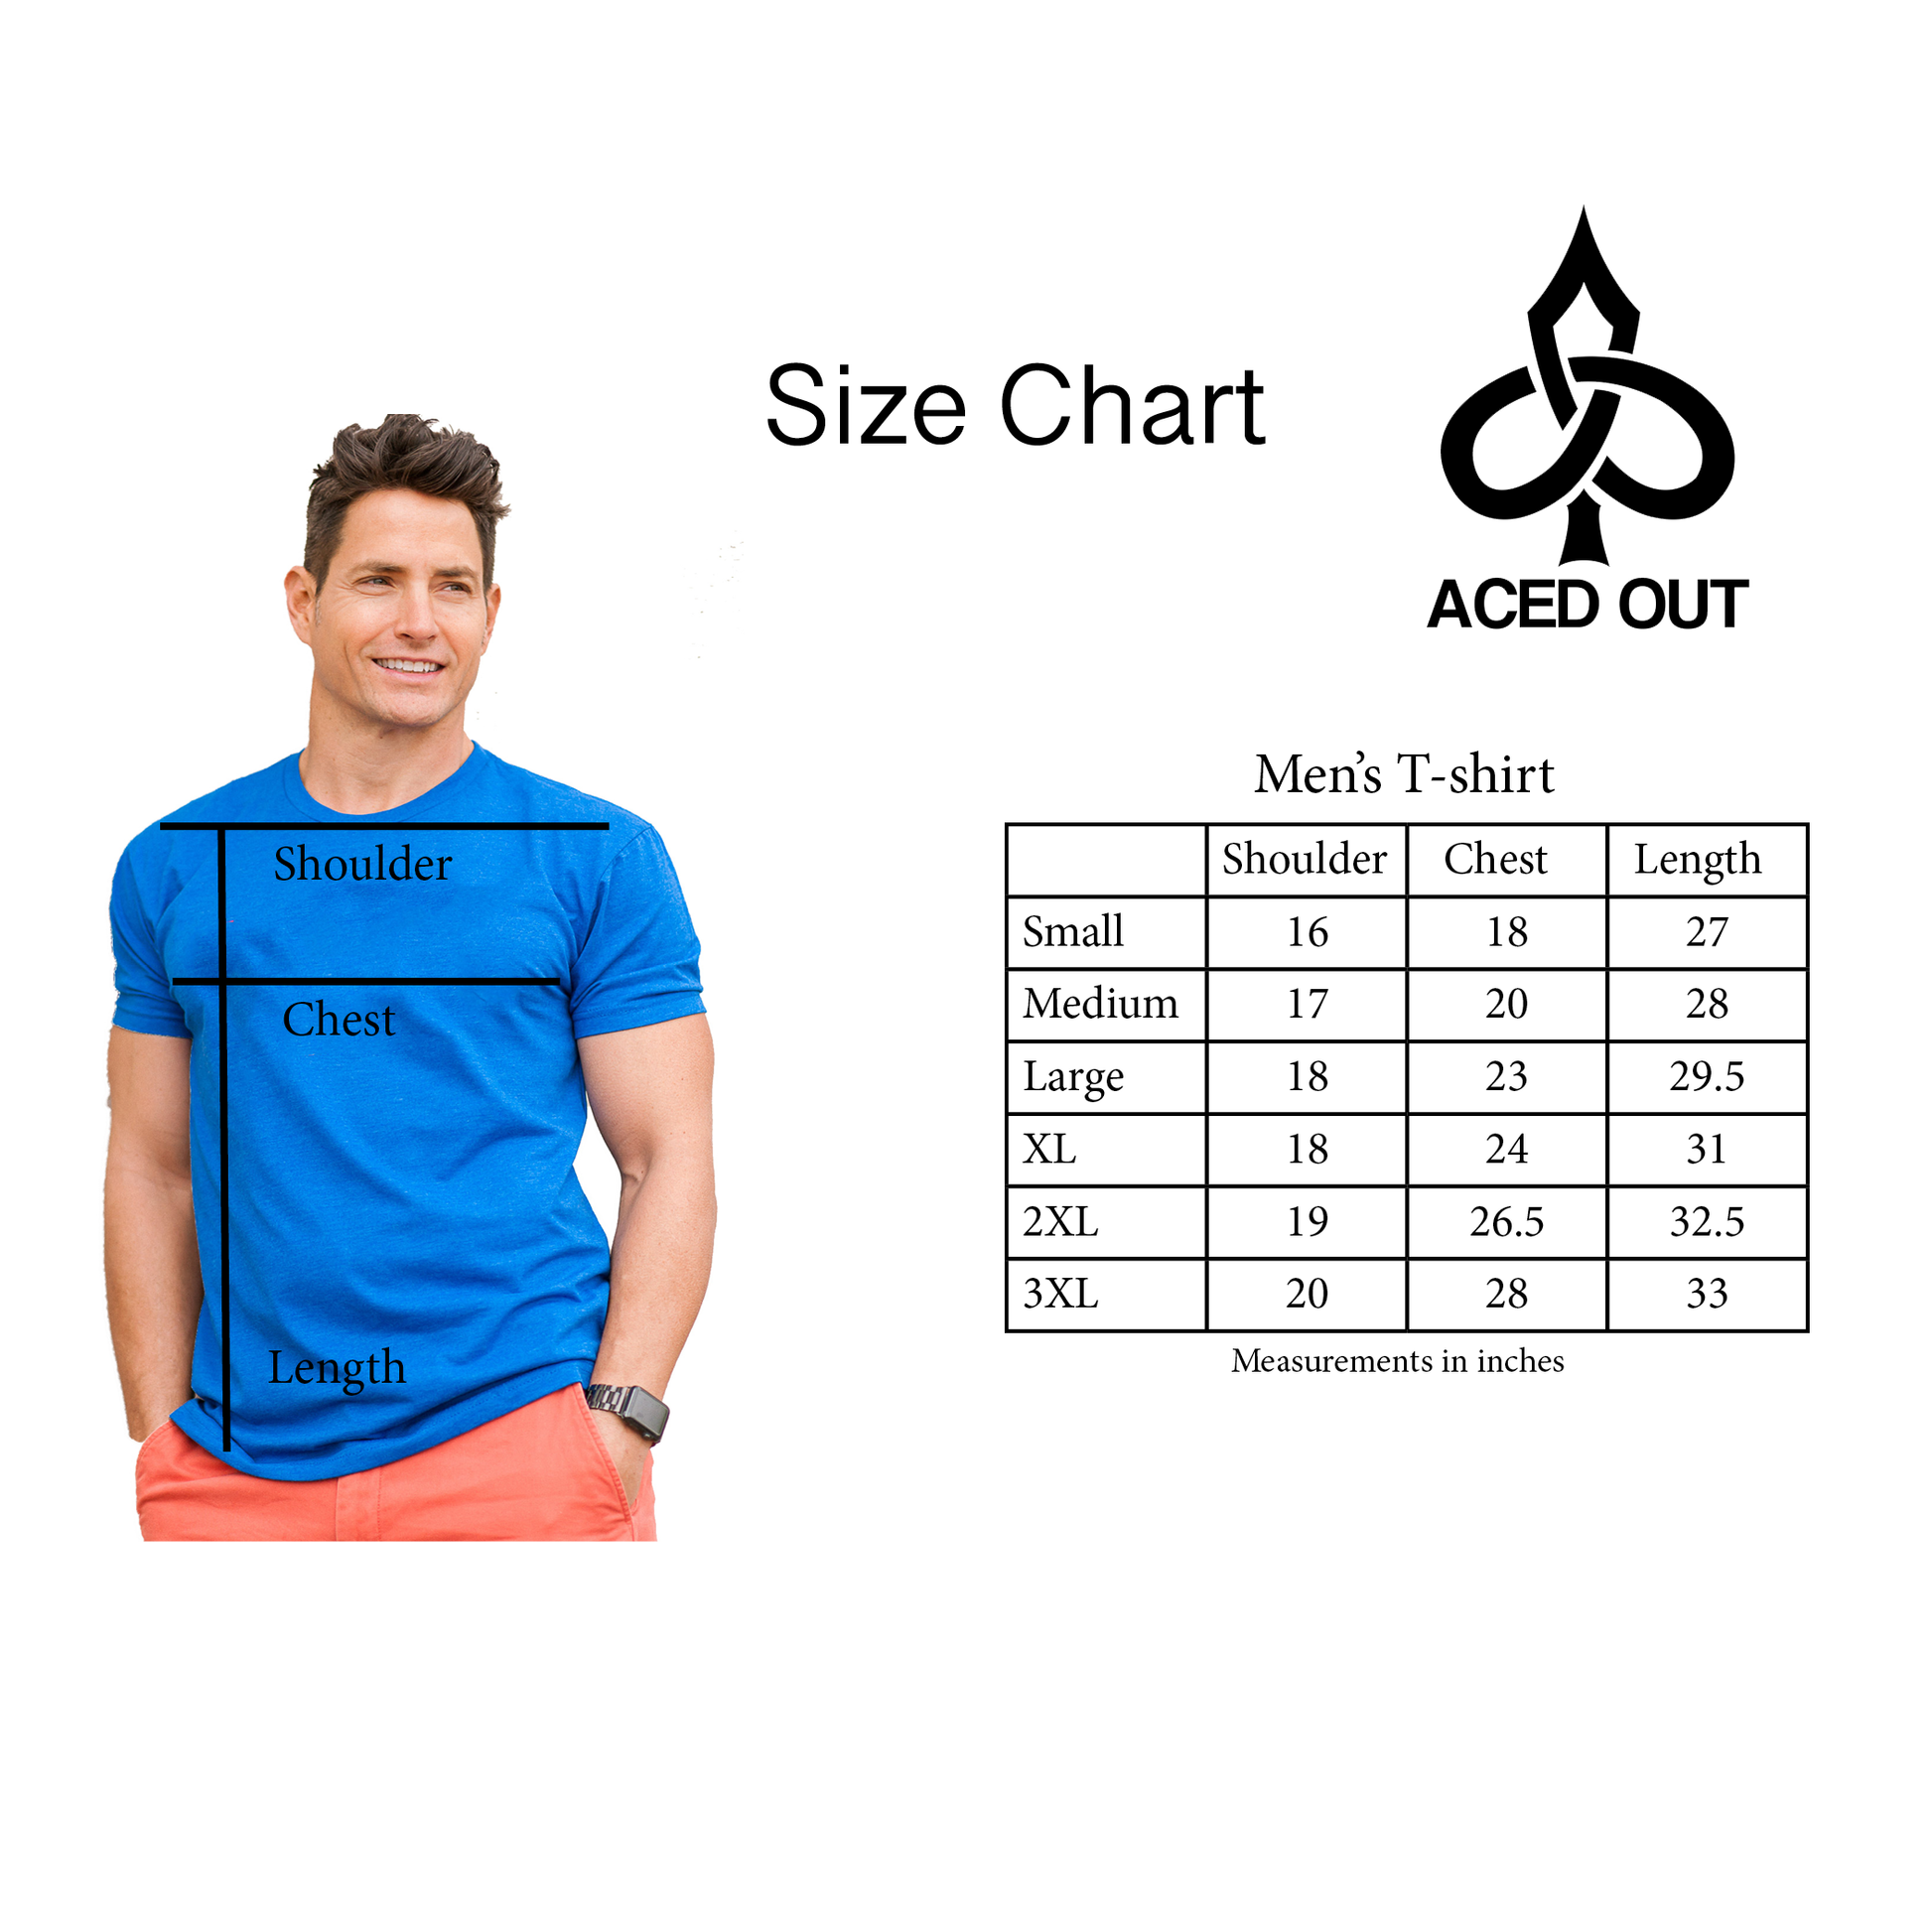 Dave Winfield 31 – Aced Out Apparel